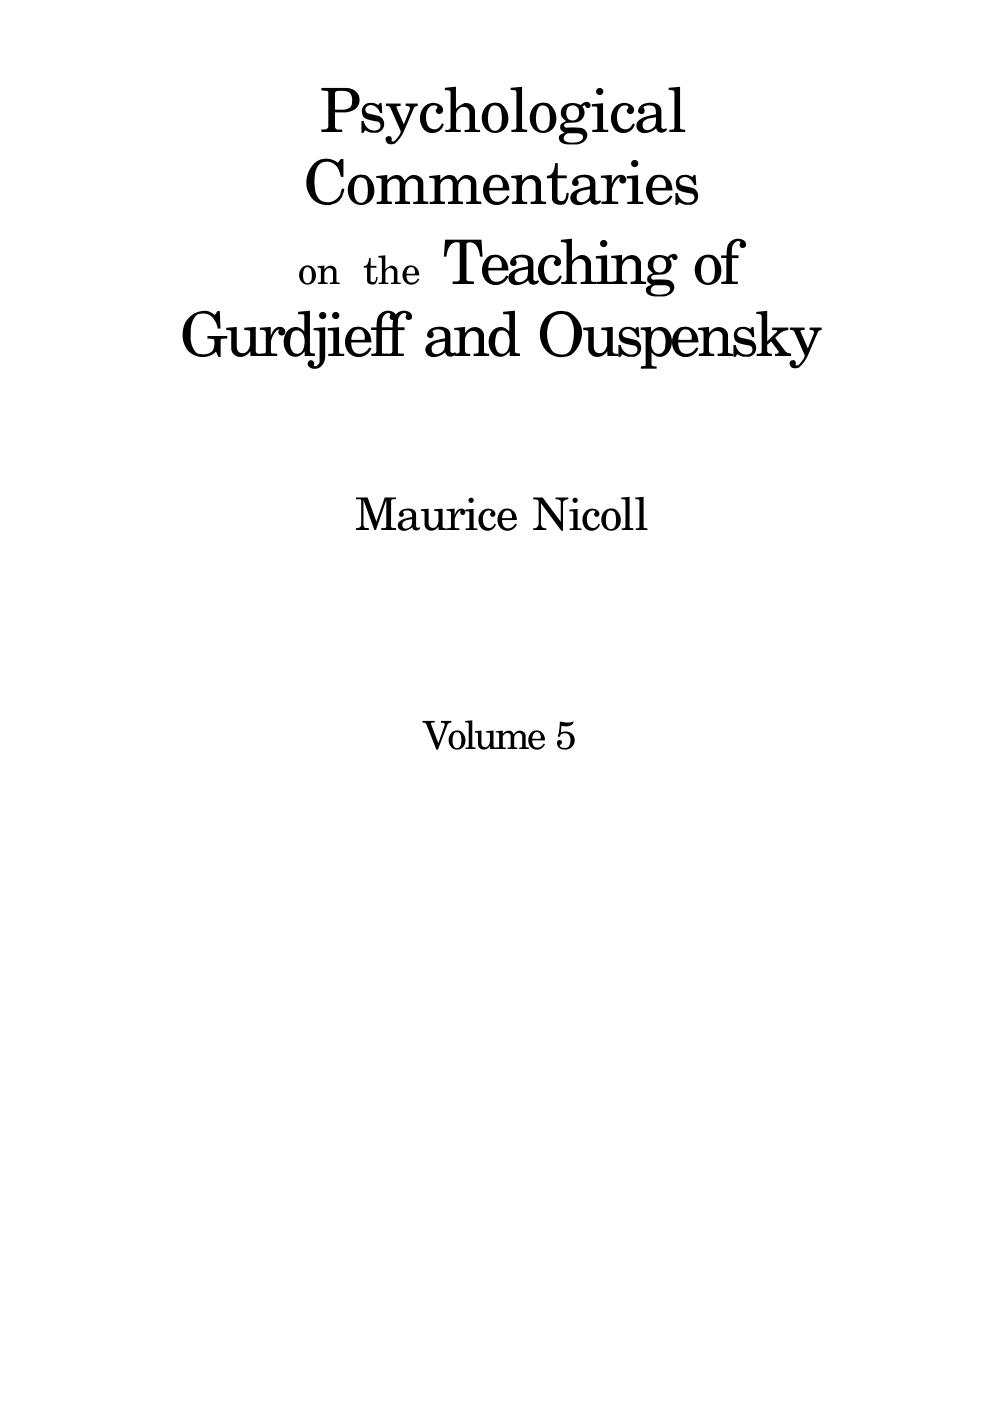 Psychological Commentaries on the Teaching of Gurdjieff and Ouspensky - Volume 5